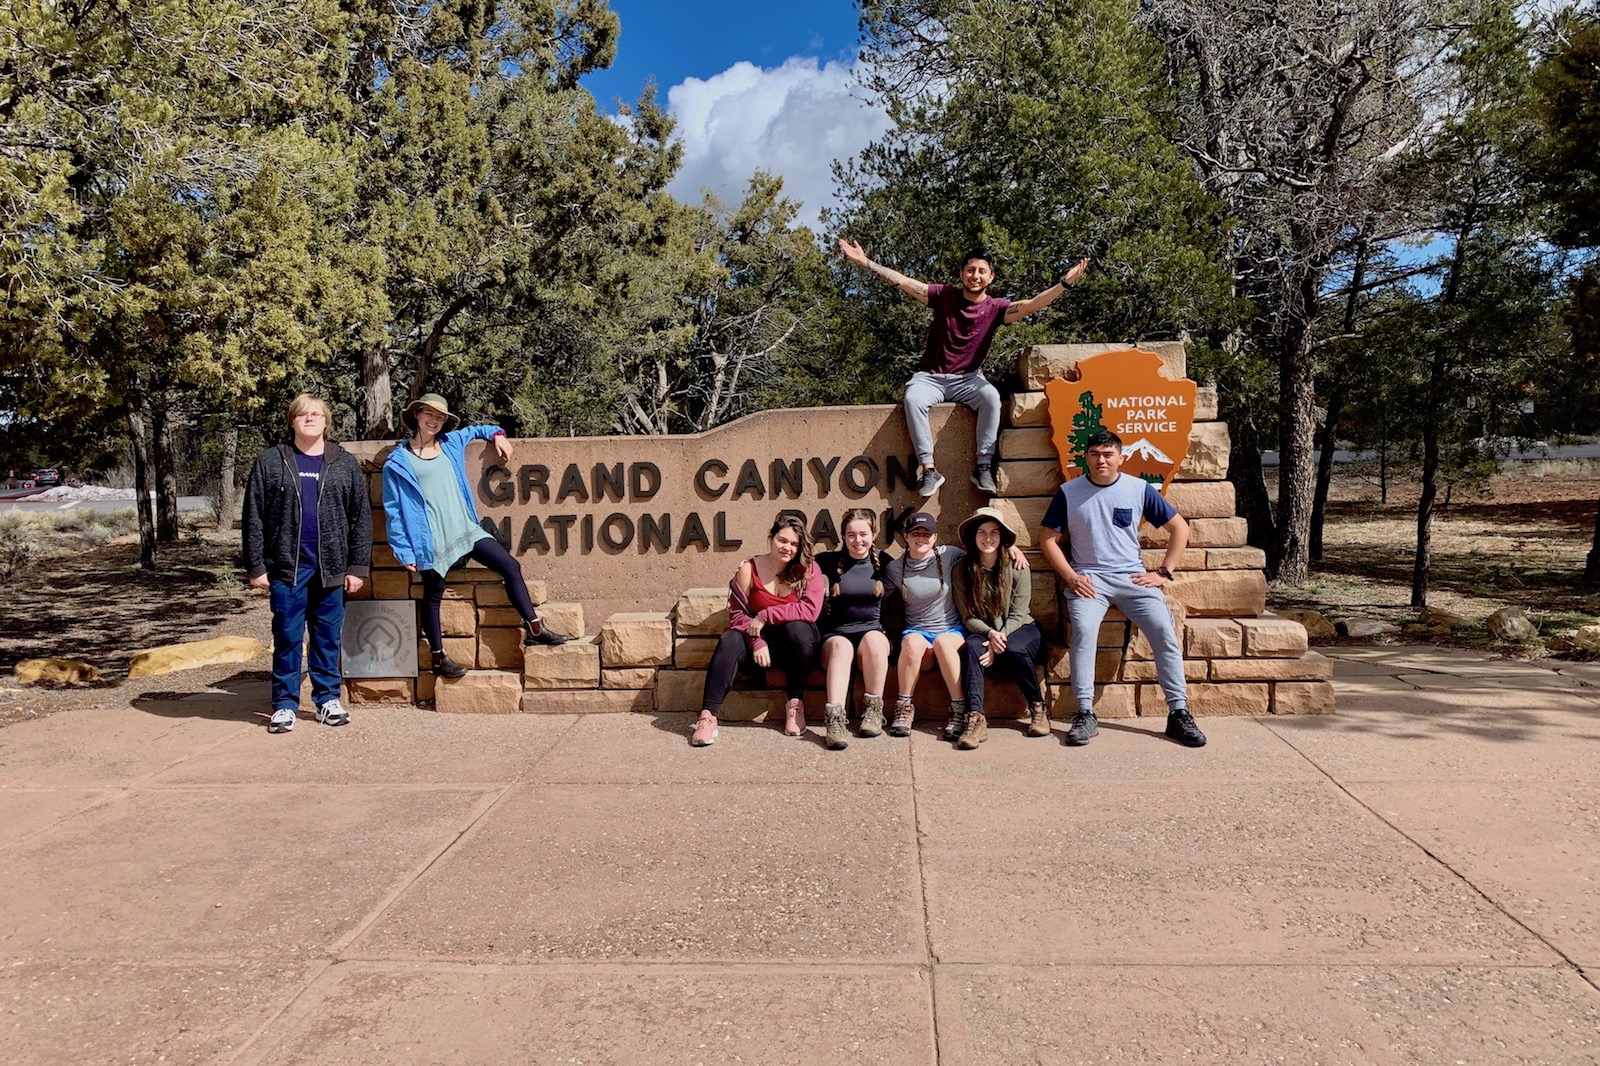 Students who went on the Grand Canyon trip were, from the left, Cody Bricker, Rebecca Thomack, Anaelle Maudet, Annabelle Spencer, Goodwin Brown, Alex Arriaga (on sign), Gwynevere Cardinal and Luis Soto.